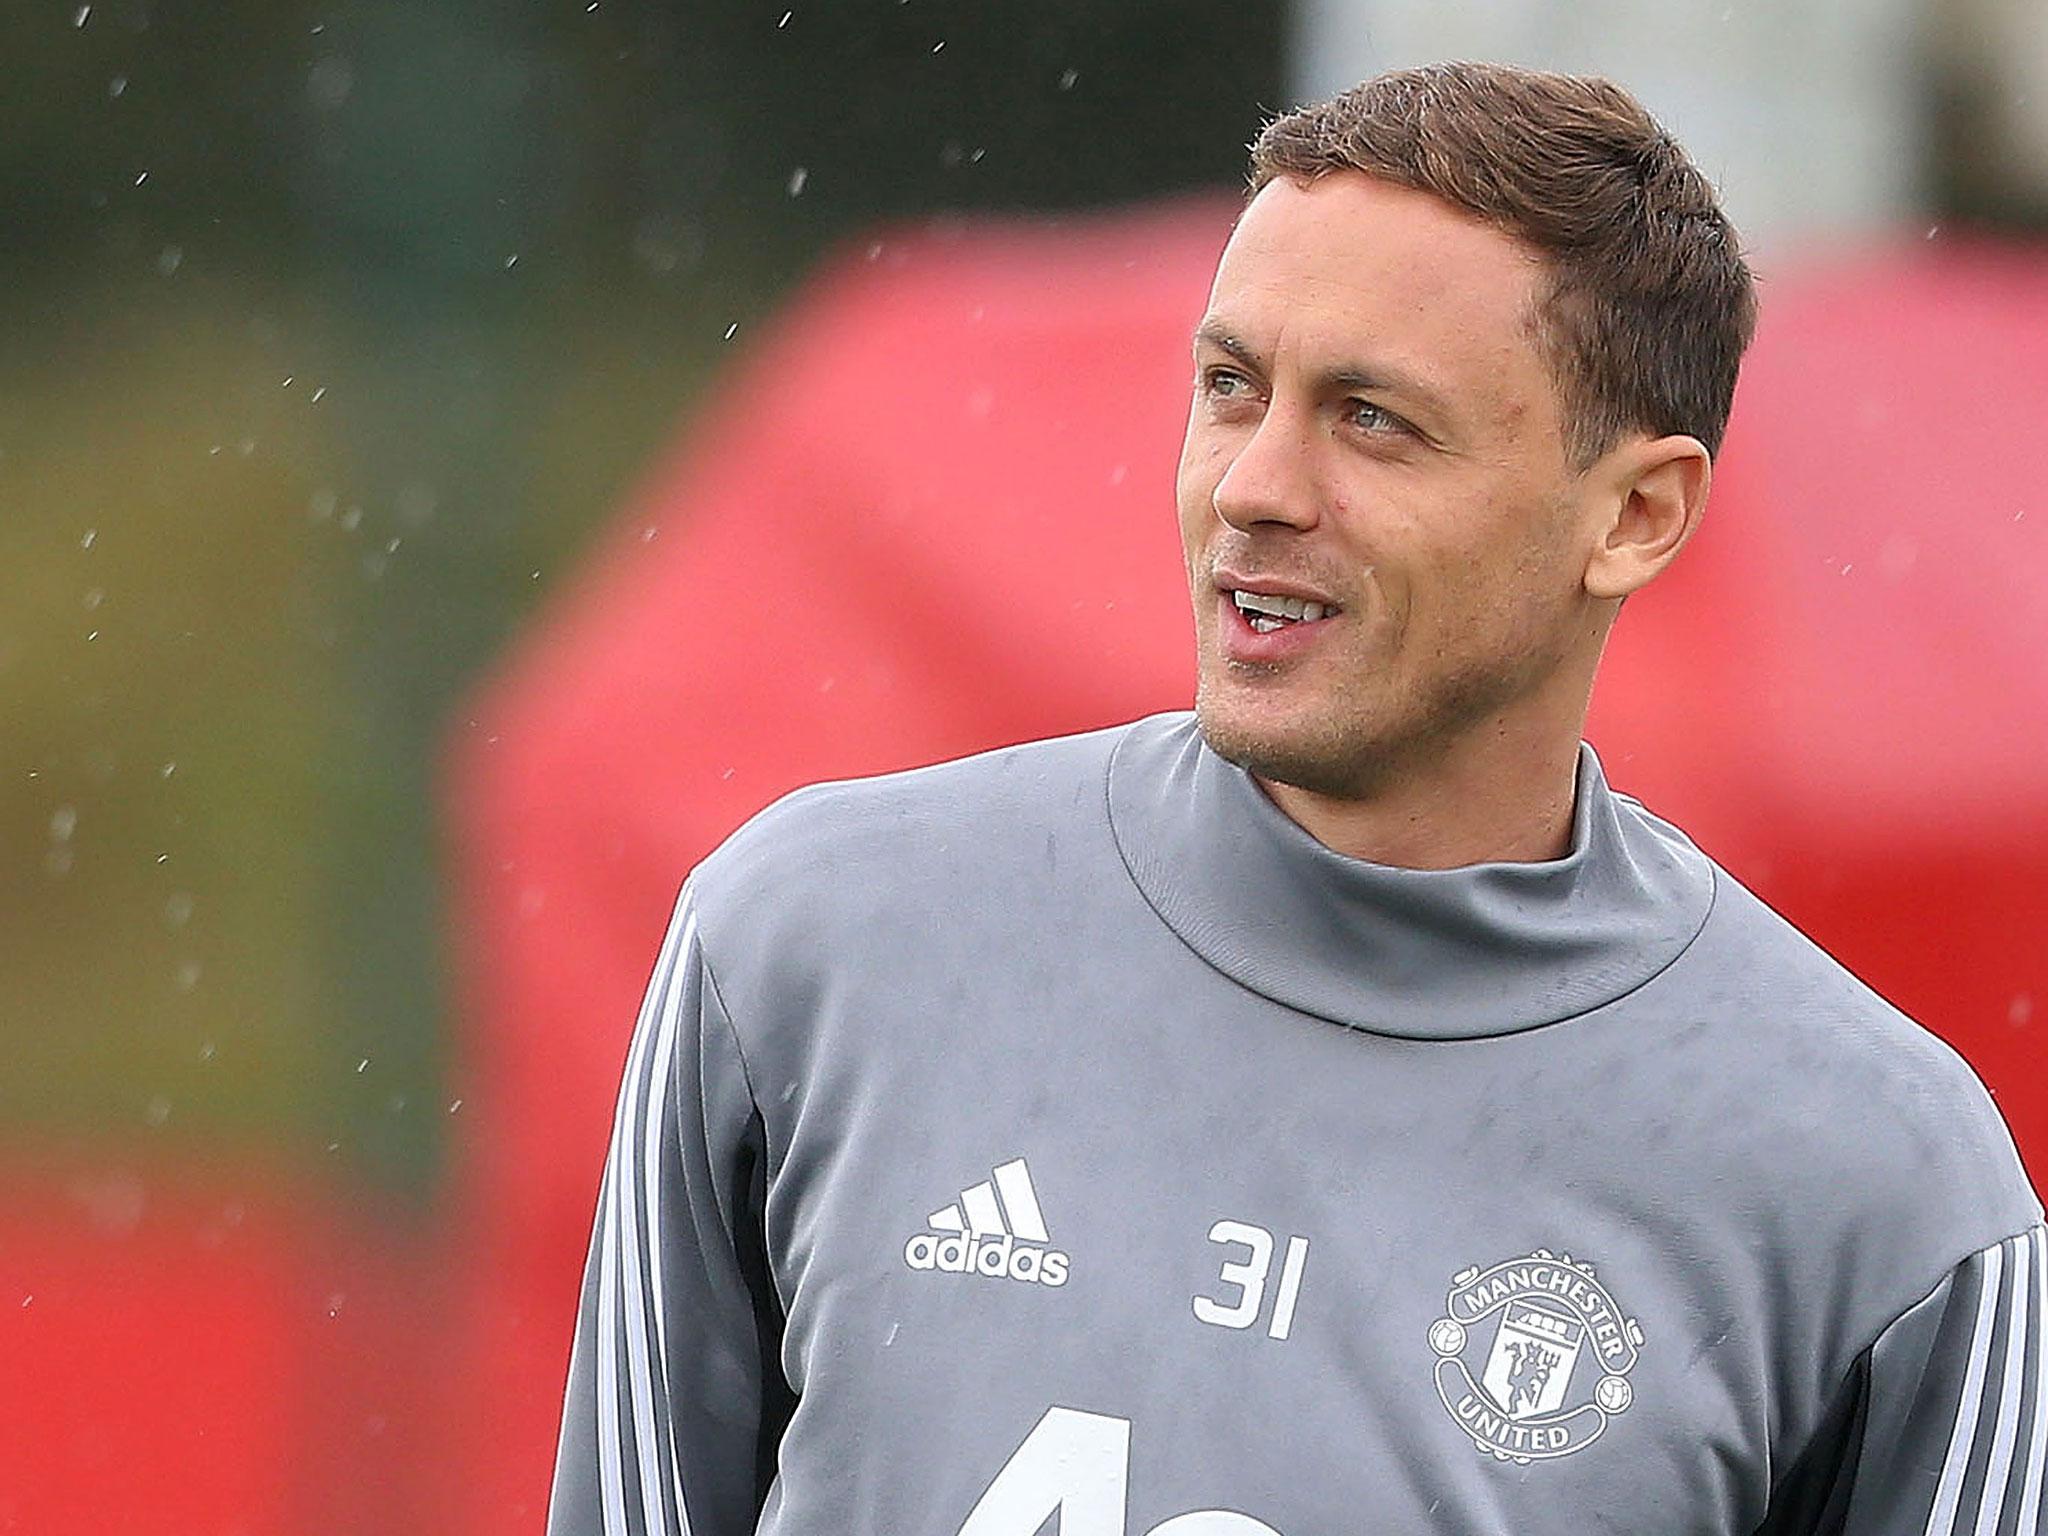 Nemanja Matic reveals the Manchester United player he most wants to emulate following his £40m move